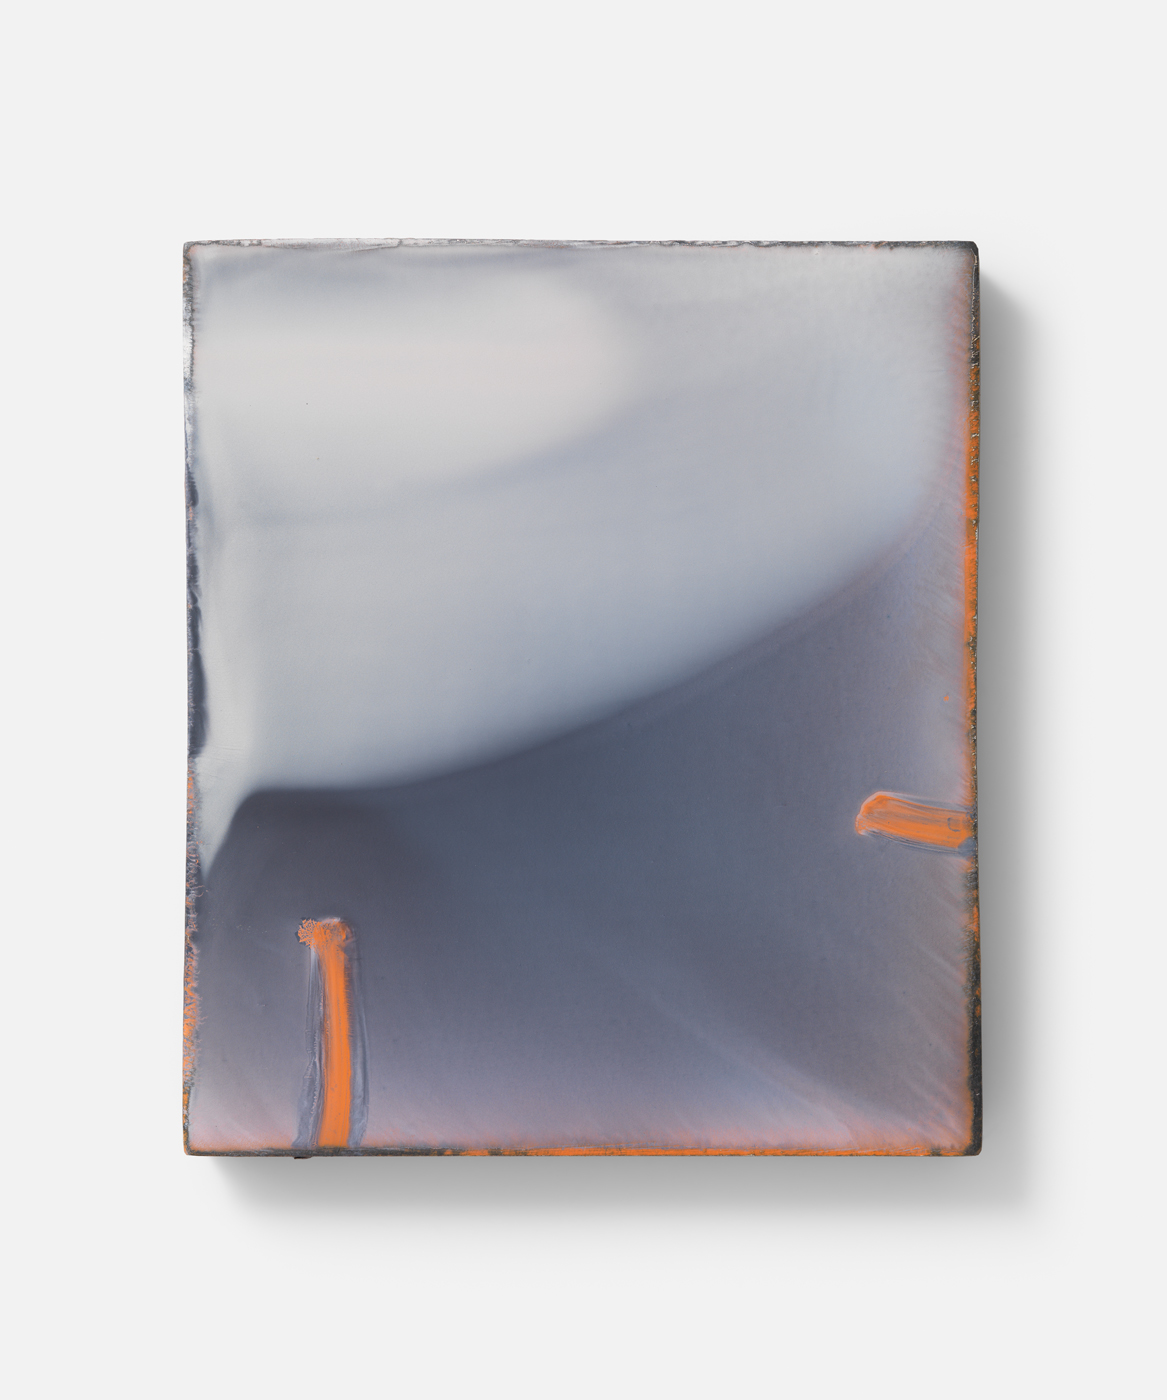     Markus Amm Untitled 2014 Oil on gesso board 35 x 30 cm / 13.7 x 11.8 in 